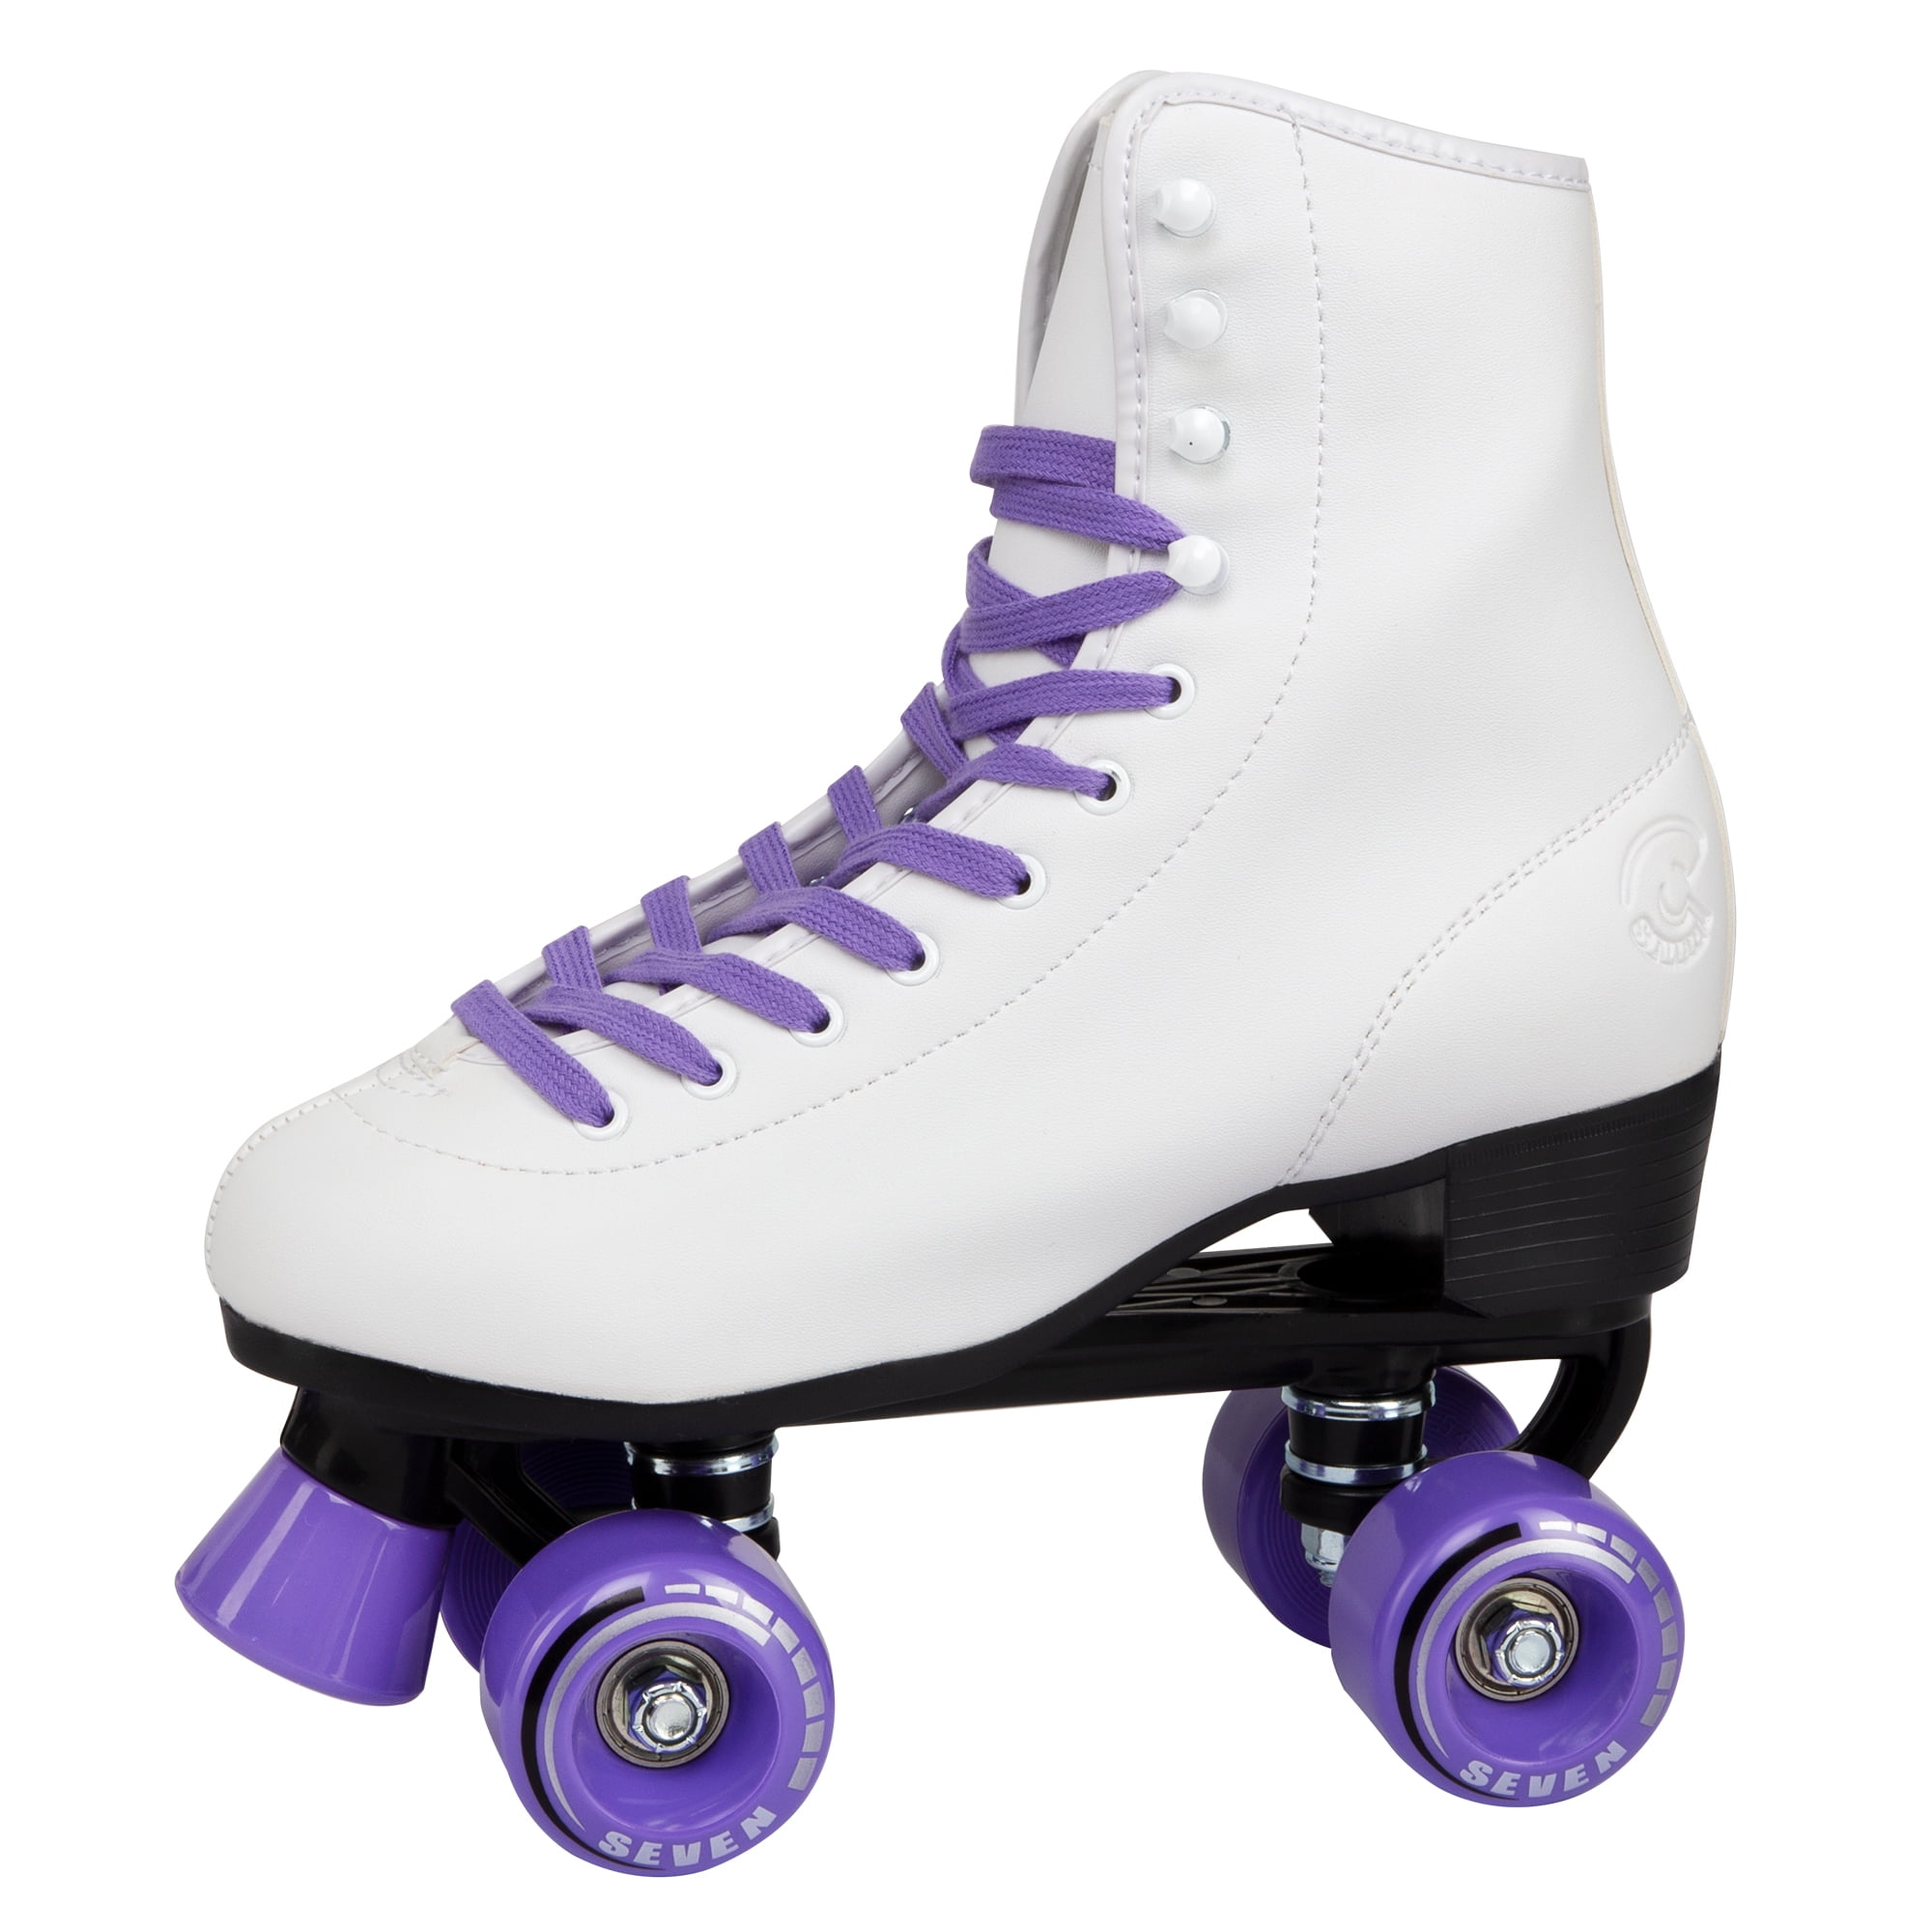 Cal 7 Roller Skates Indoor Outdoor Skating Graphic Faux Leather Boot PVC Frame 